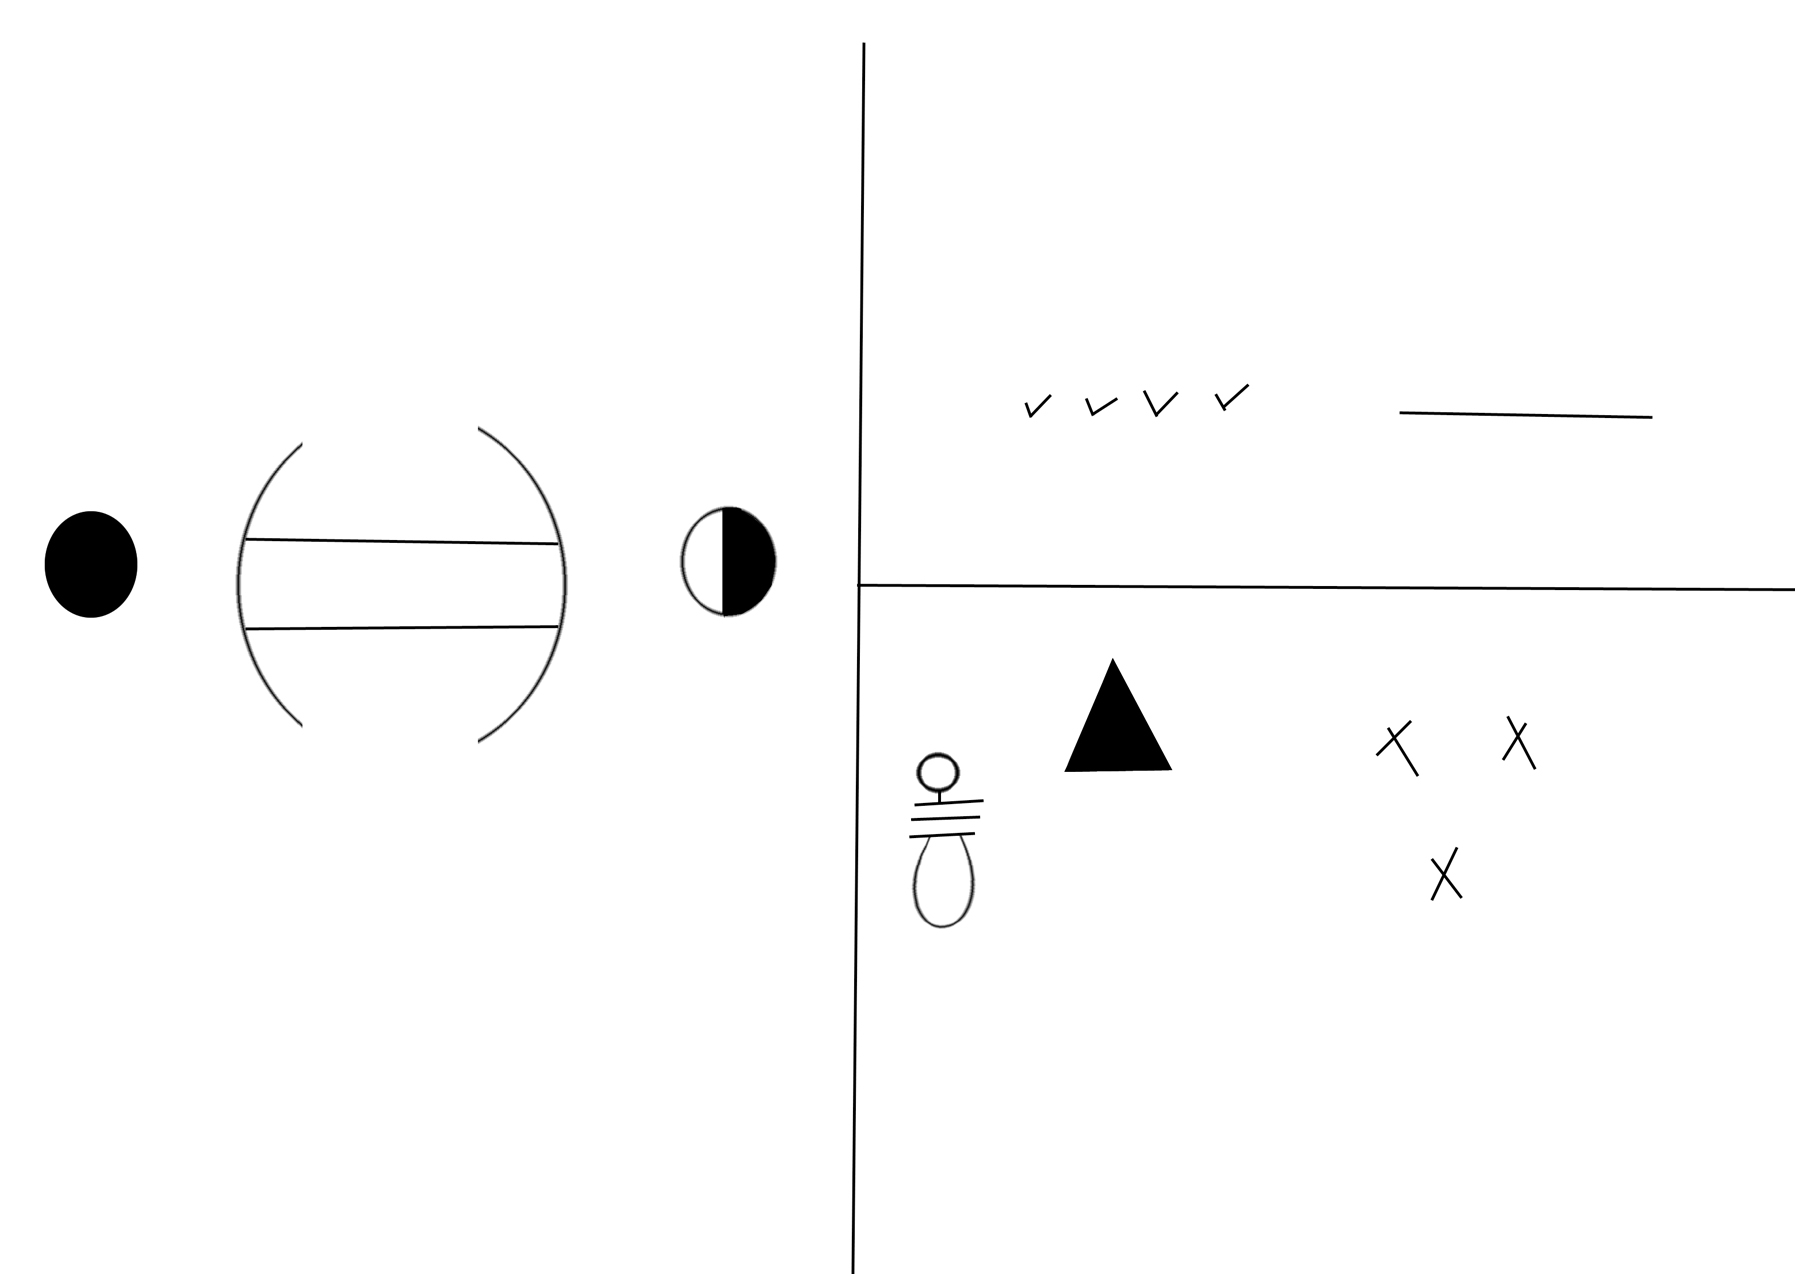 A digital drawing of a field in three segments, each marked with a set of minimals curves and triangles